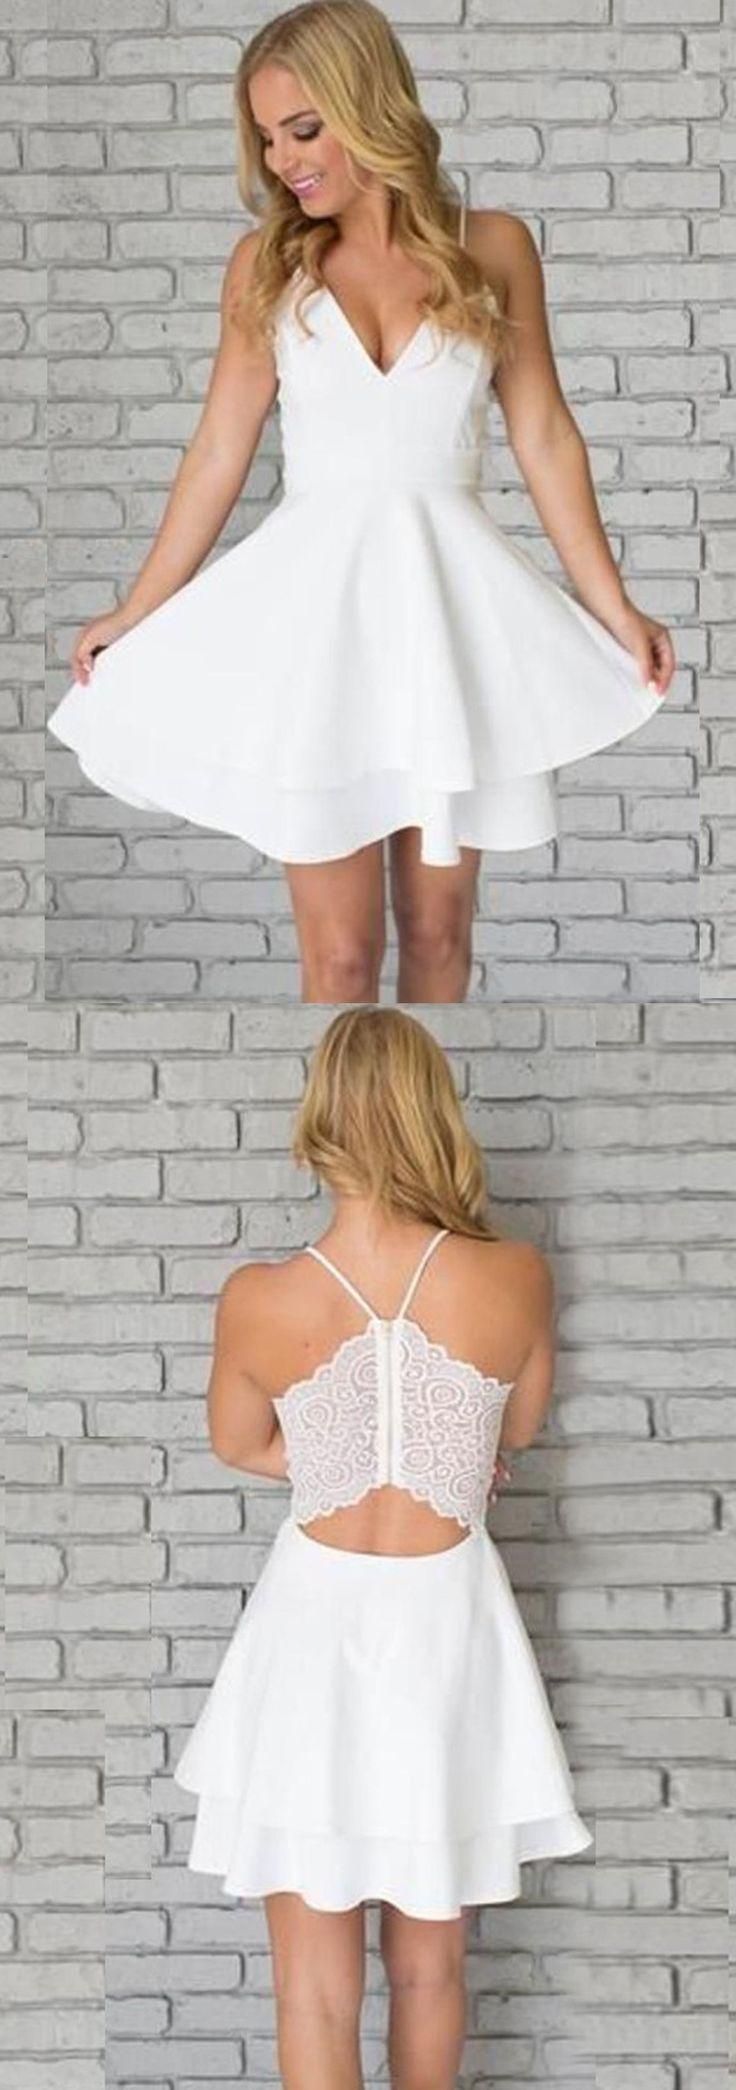 Mariage - A-Line Spaghetti Straps Short White Satin Homecoming Dress With Lace